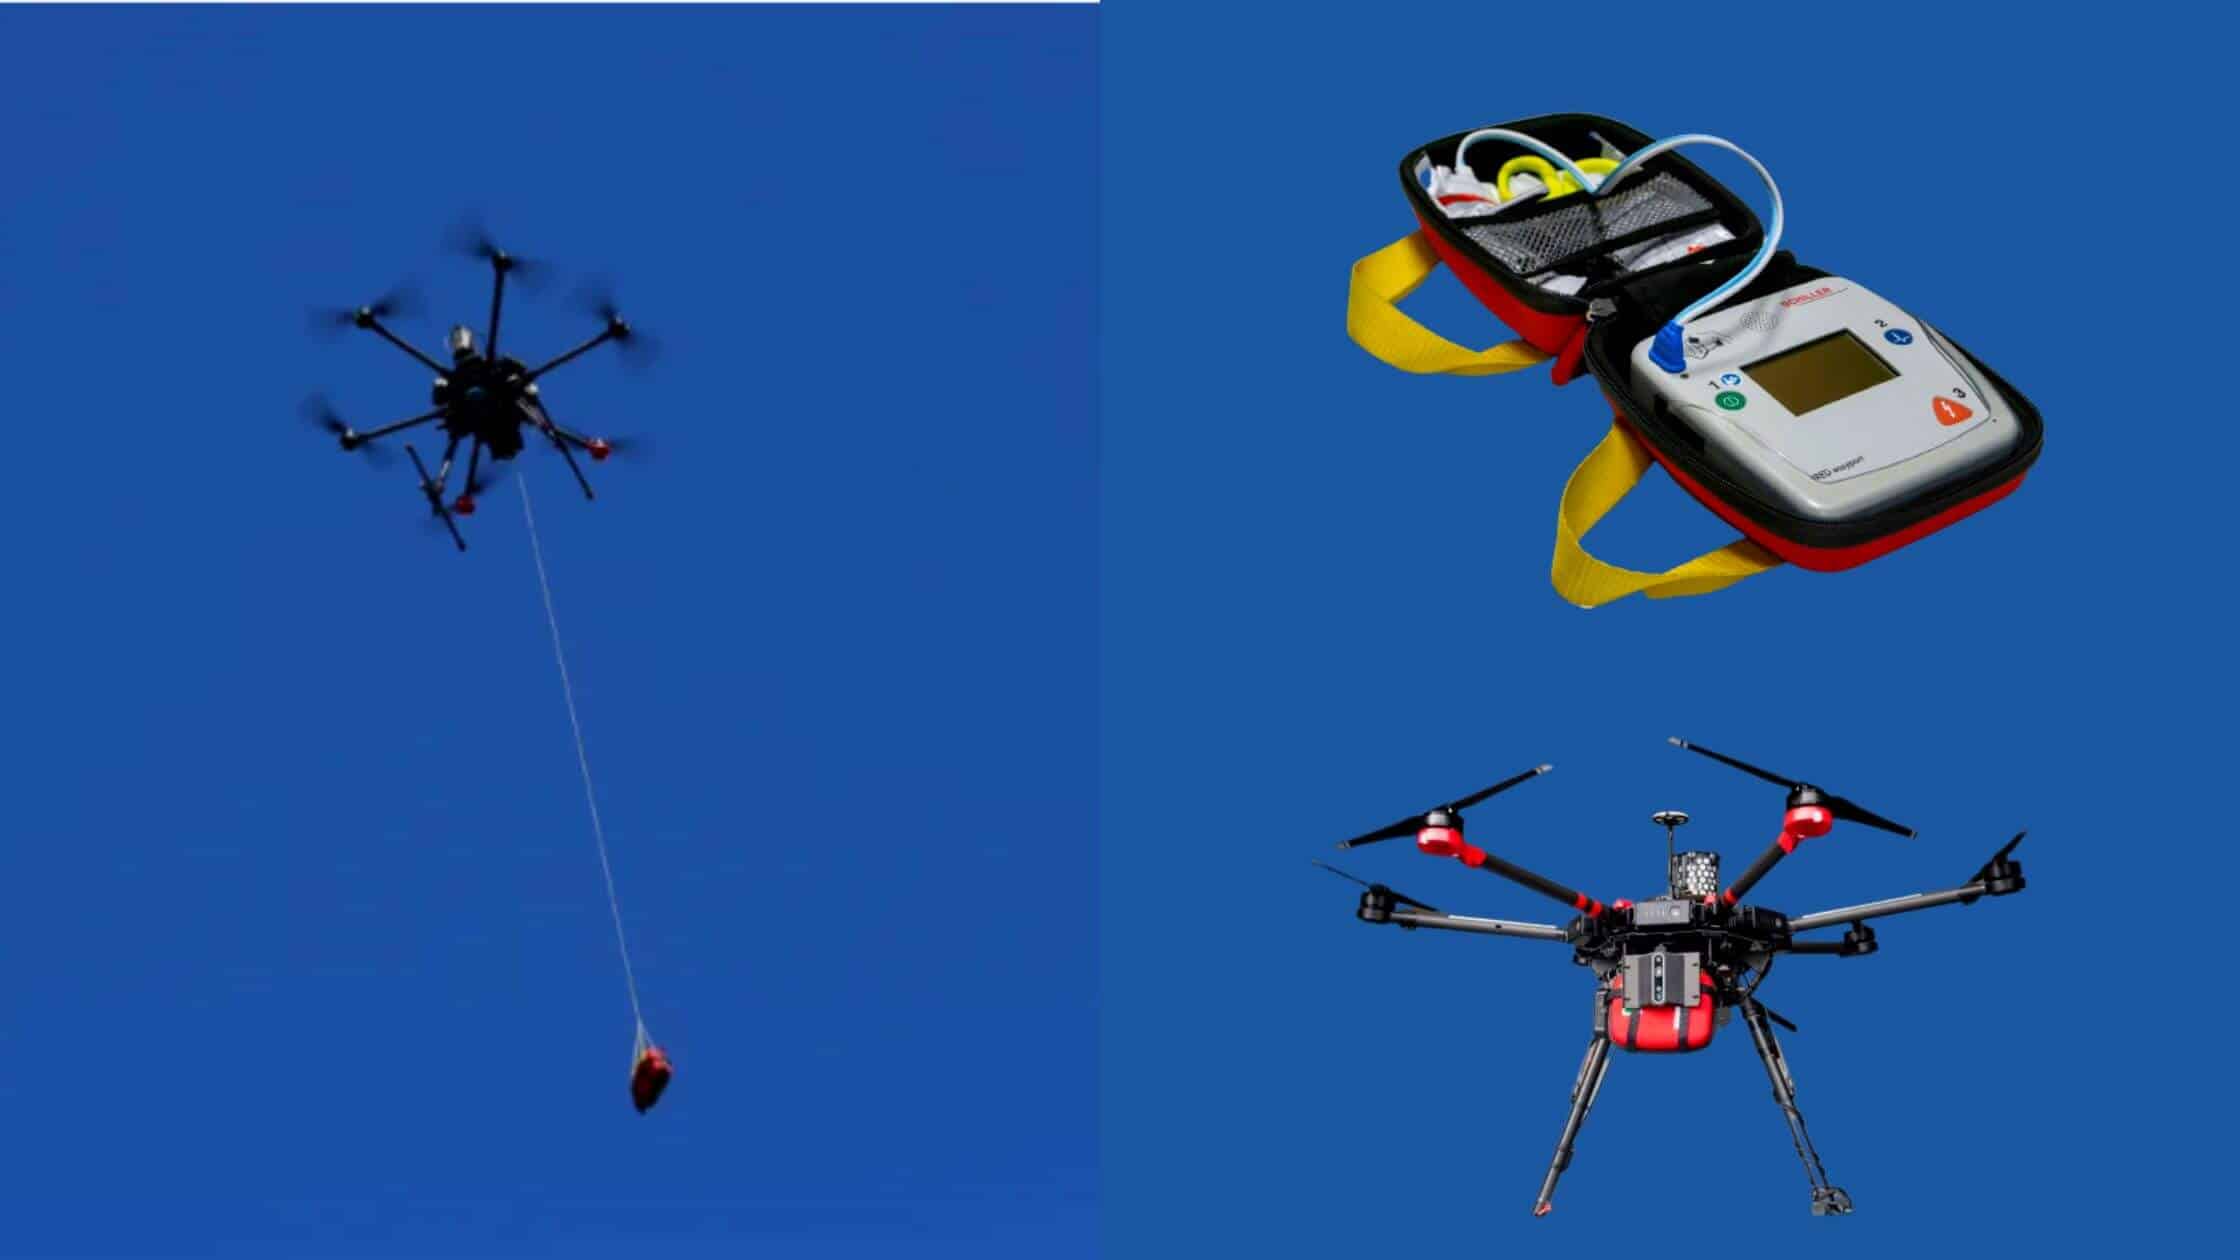 Defibrillators Carried By Drones Might Save Lives In Cardiac Crises